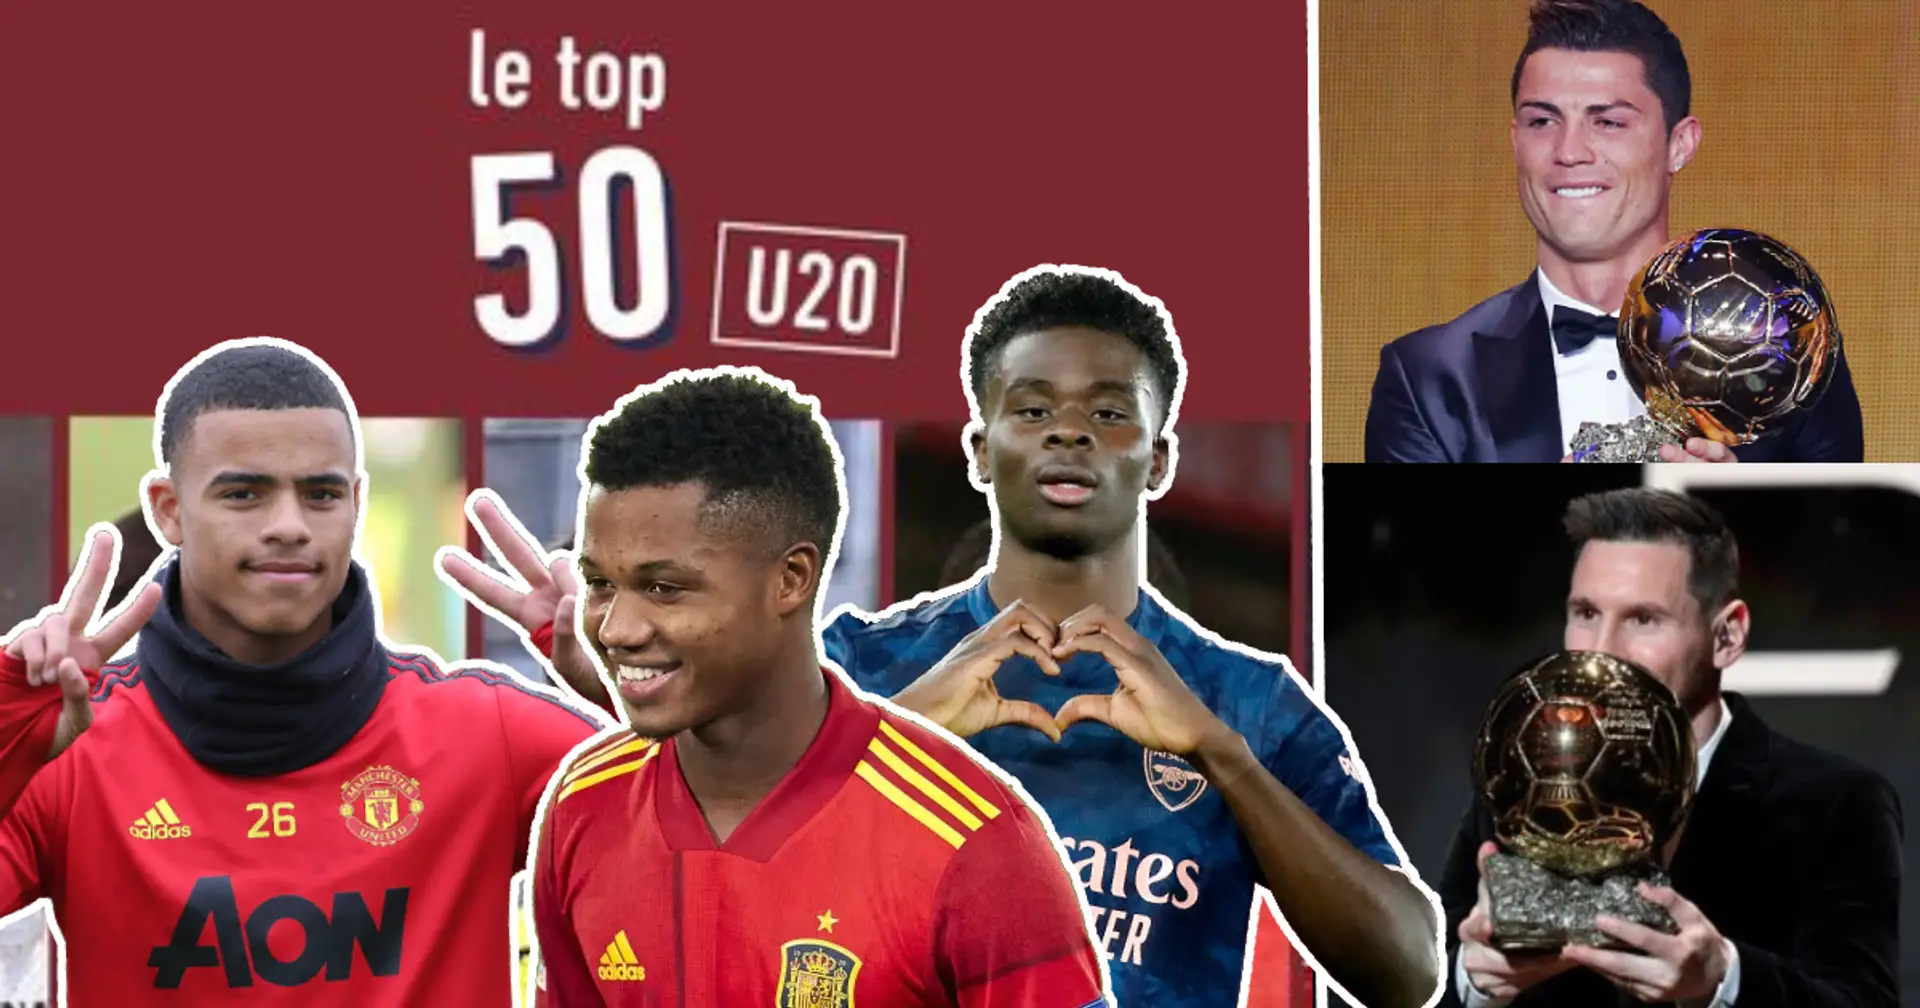 L'Equipe named 10 best players under 20 - they are the future of football